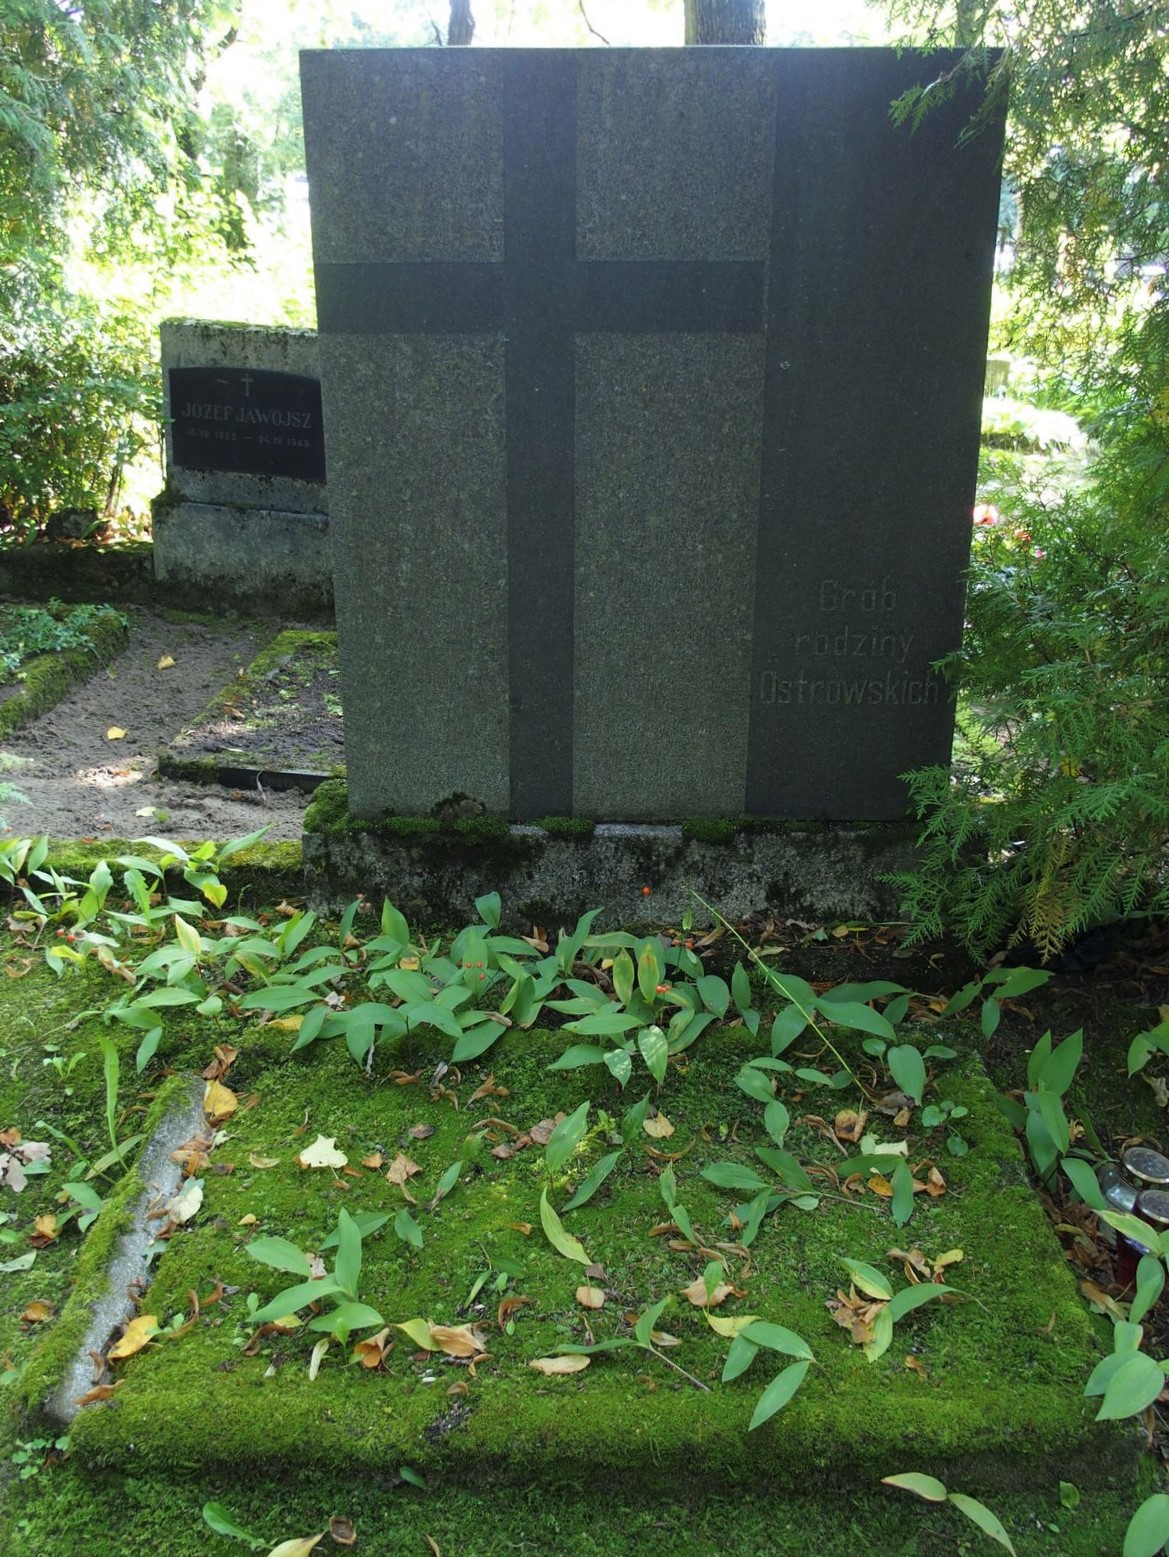 Tombstone of the Ostrowski family, St Michael's cemetery in Riga, as of 2021.